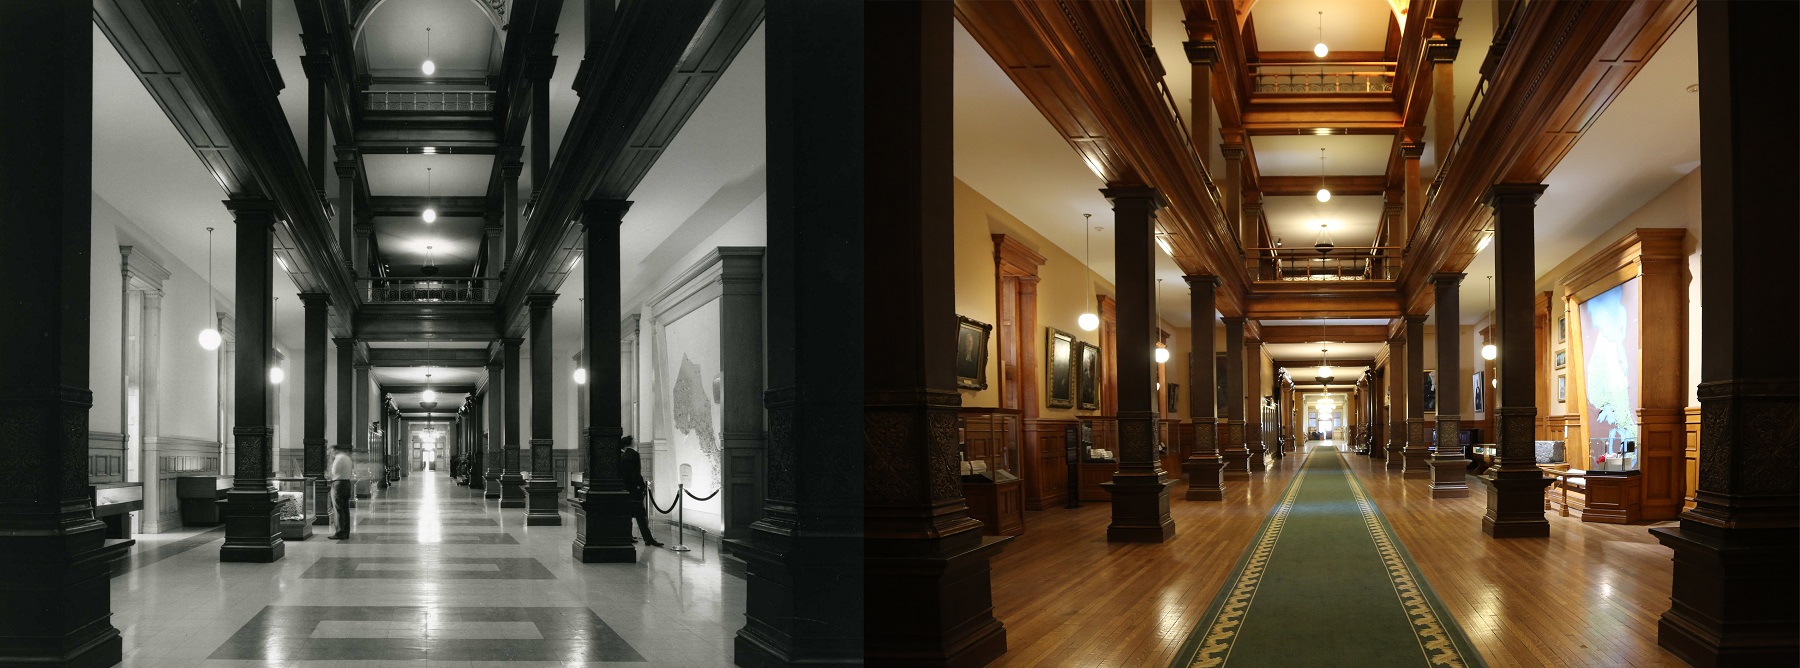 East wing of Ontario's Legislative Building, 1960 and 2017